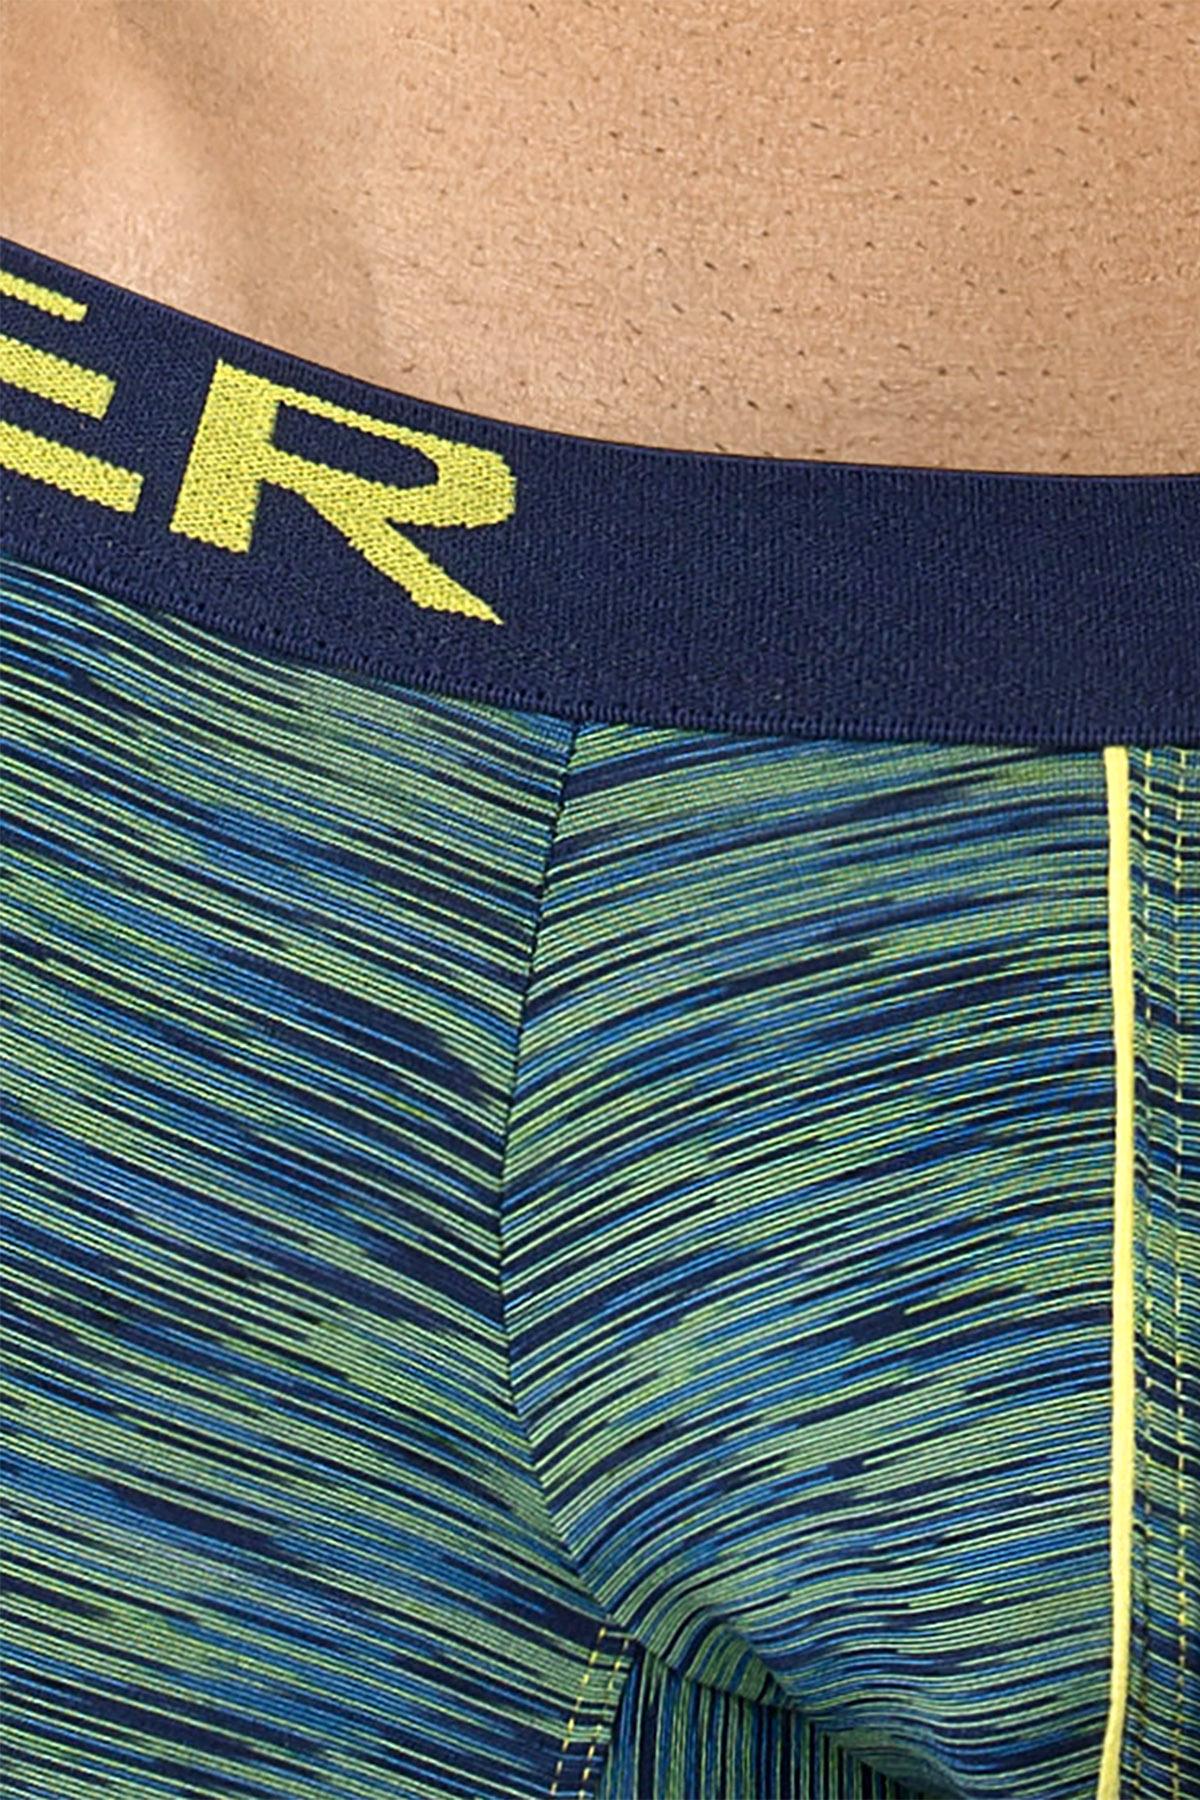 Clever Green/Navy Opera Boxer Brief